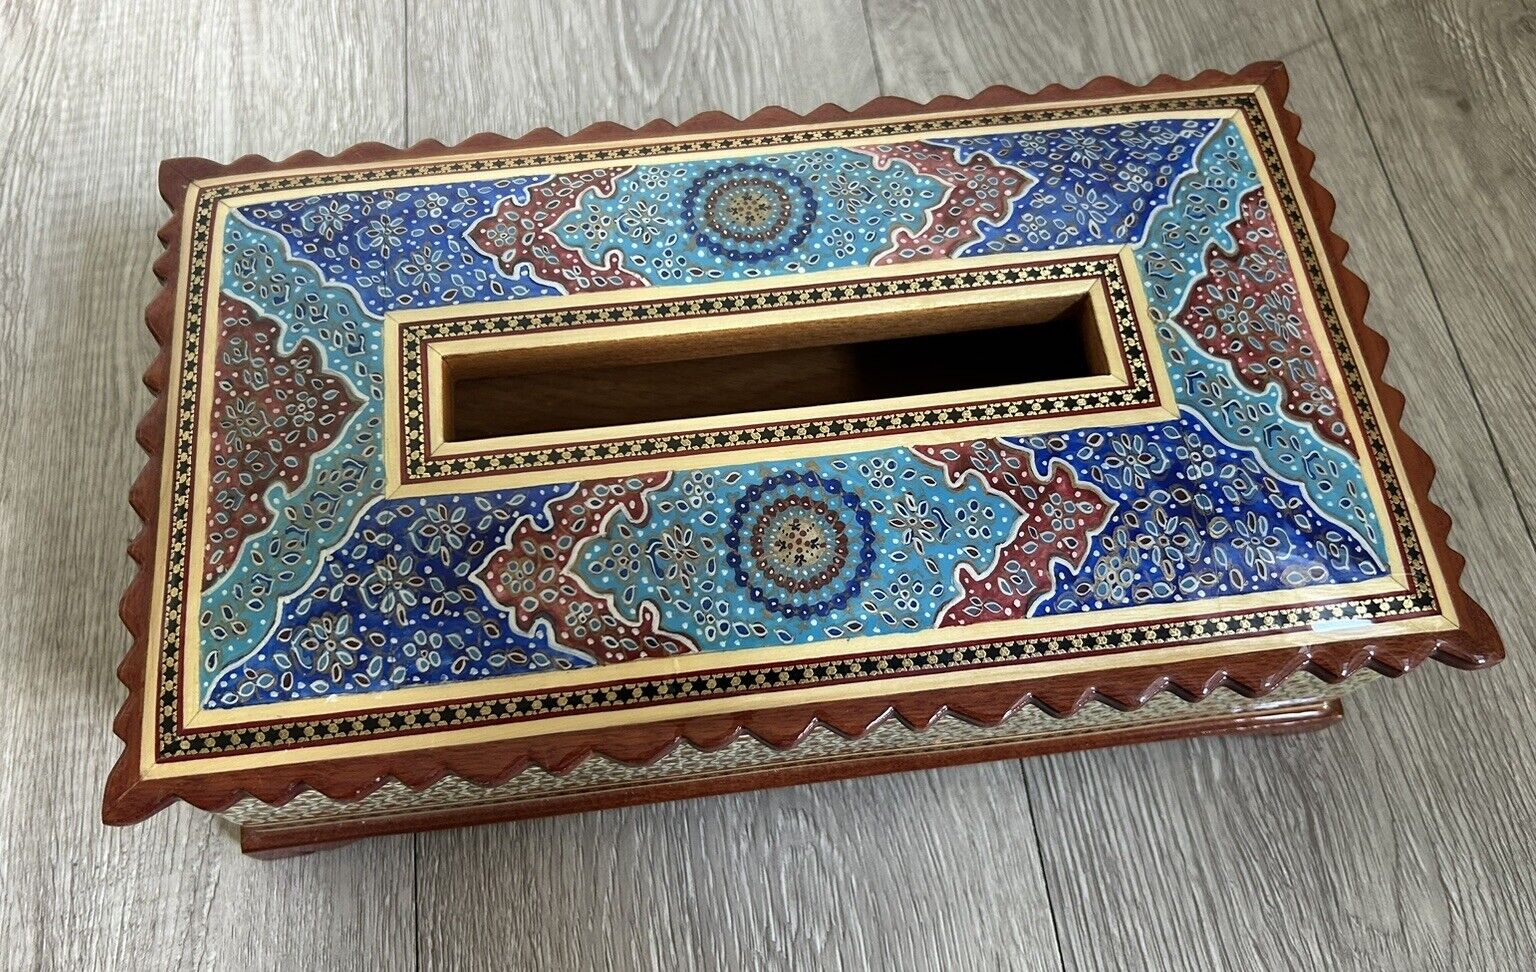 Authentic Persian Marquetry Wooden Tissue Box Hinged Hand Crafted Multicolor